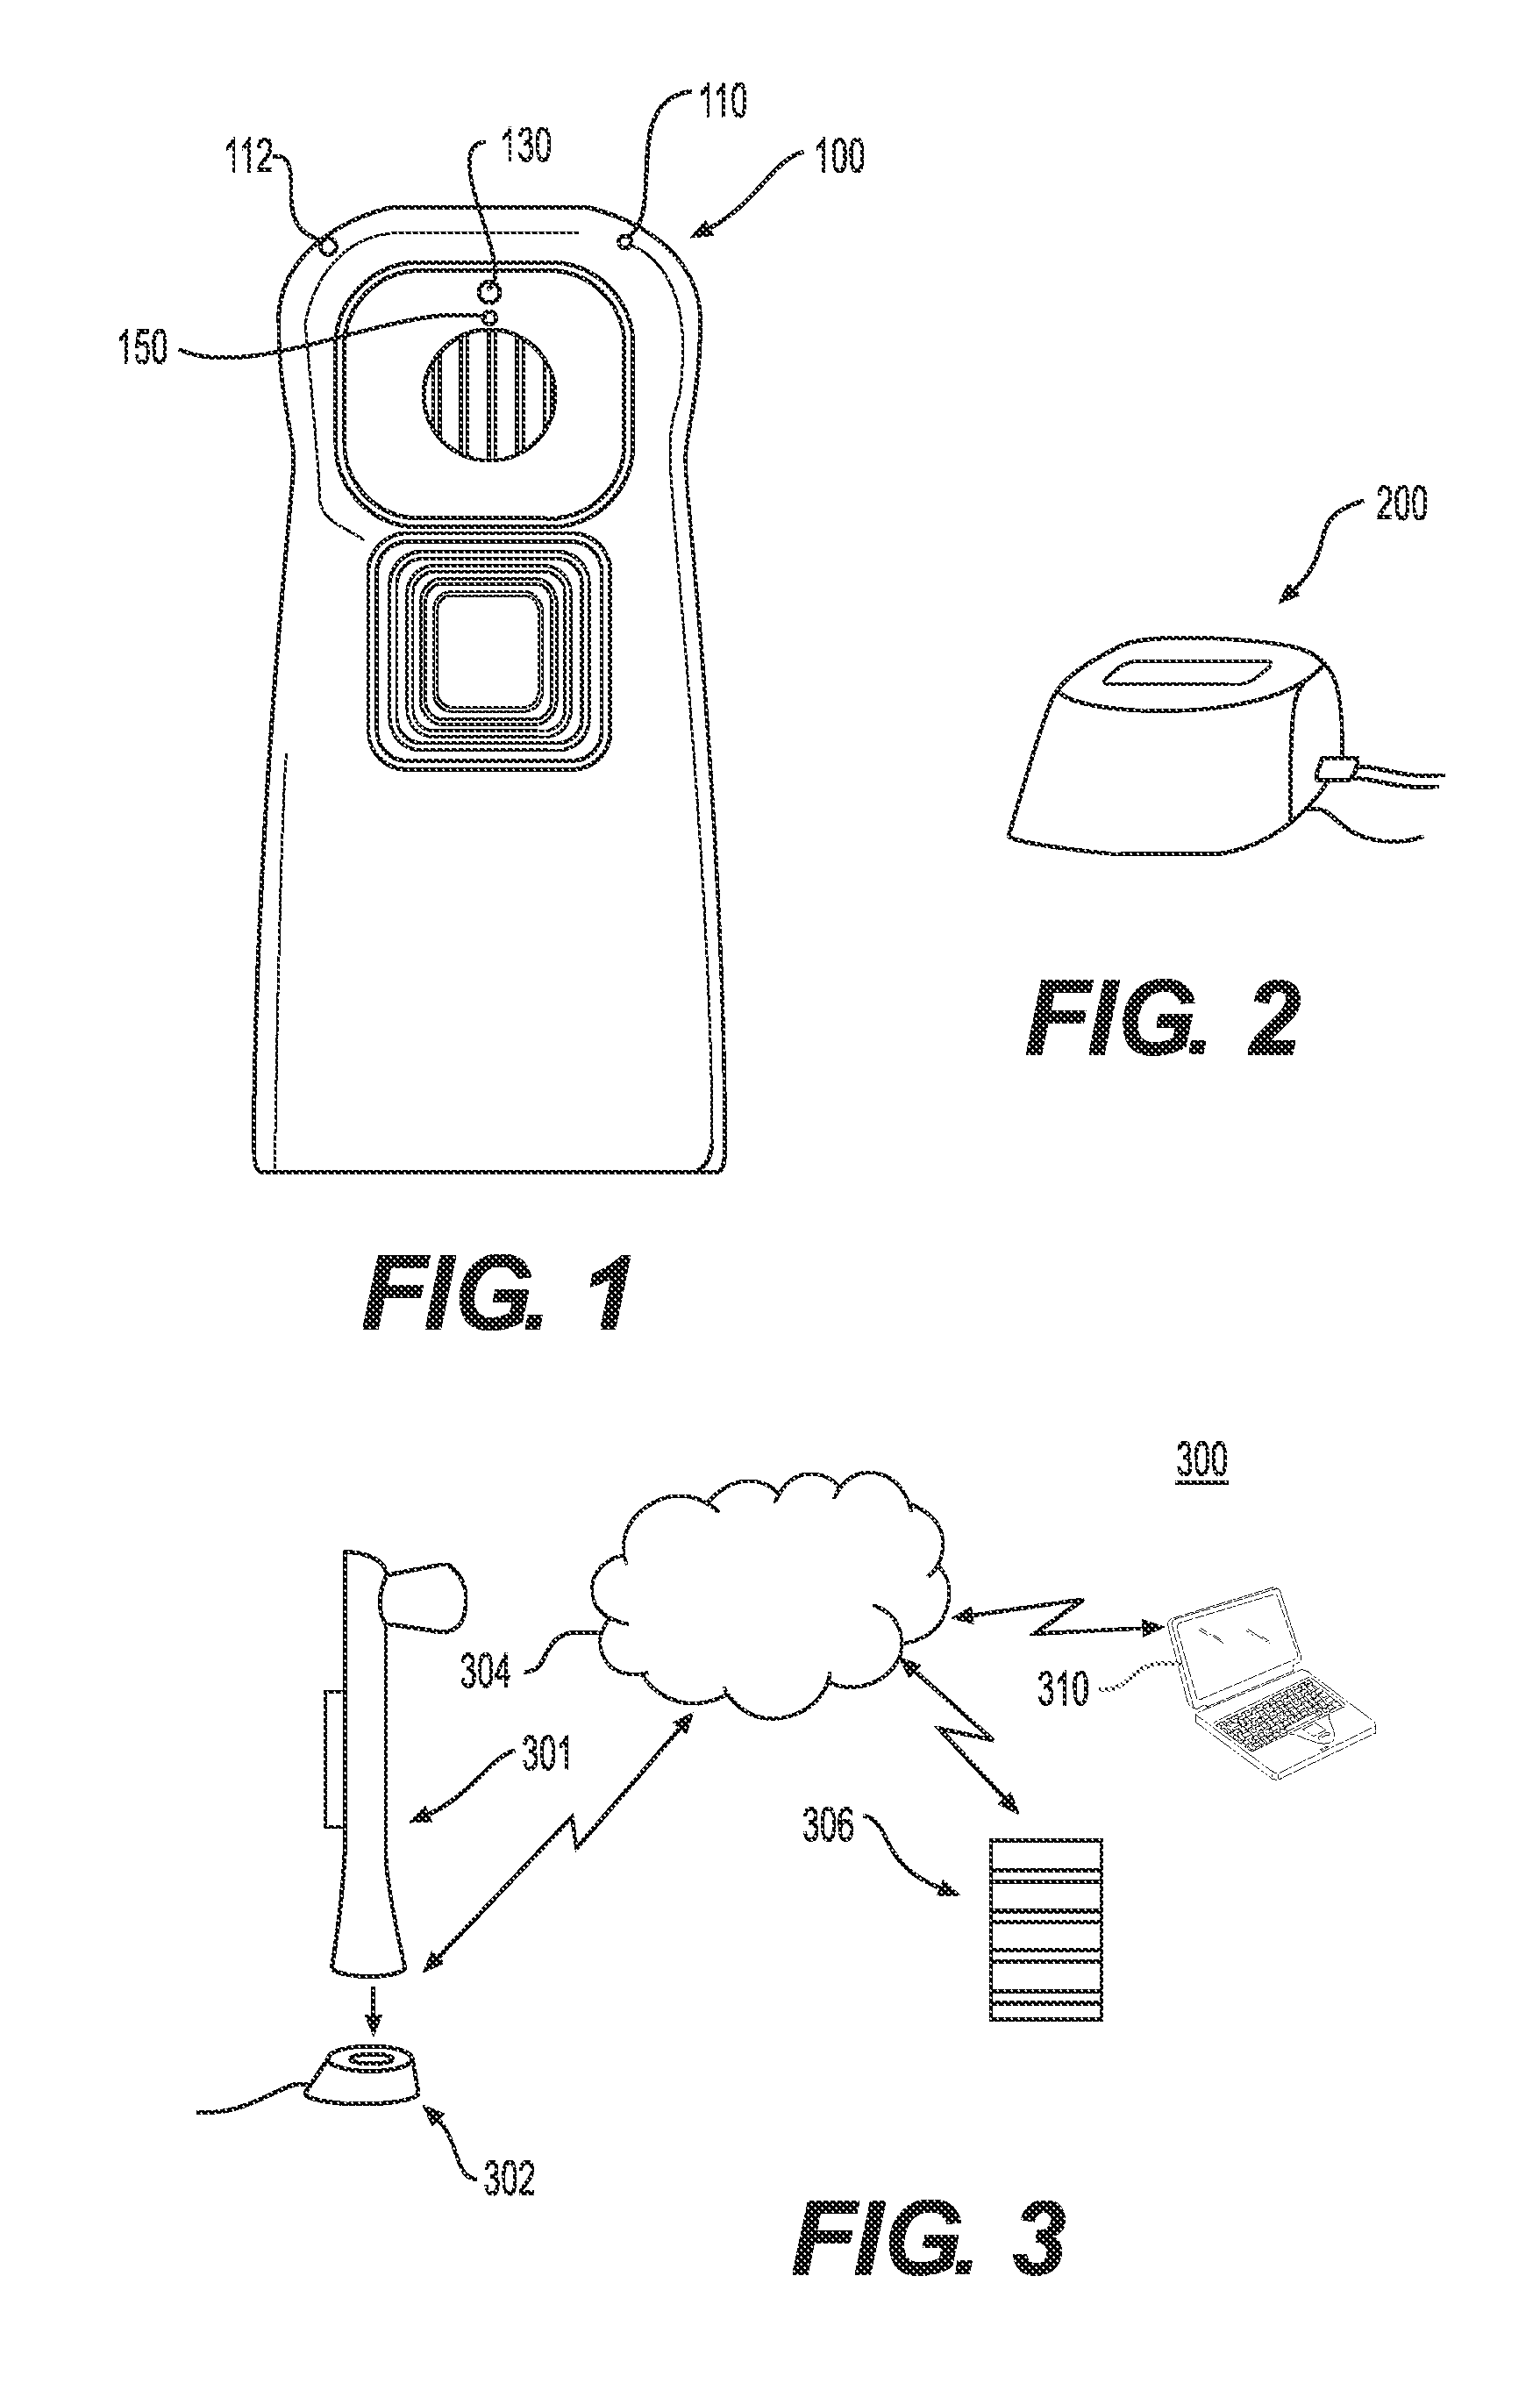 Method and System for Performing Remote Treatment and Monitoring